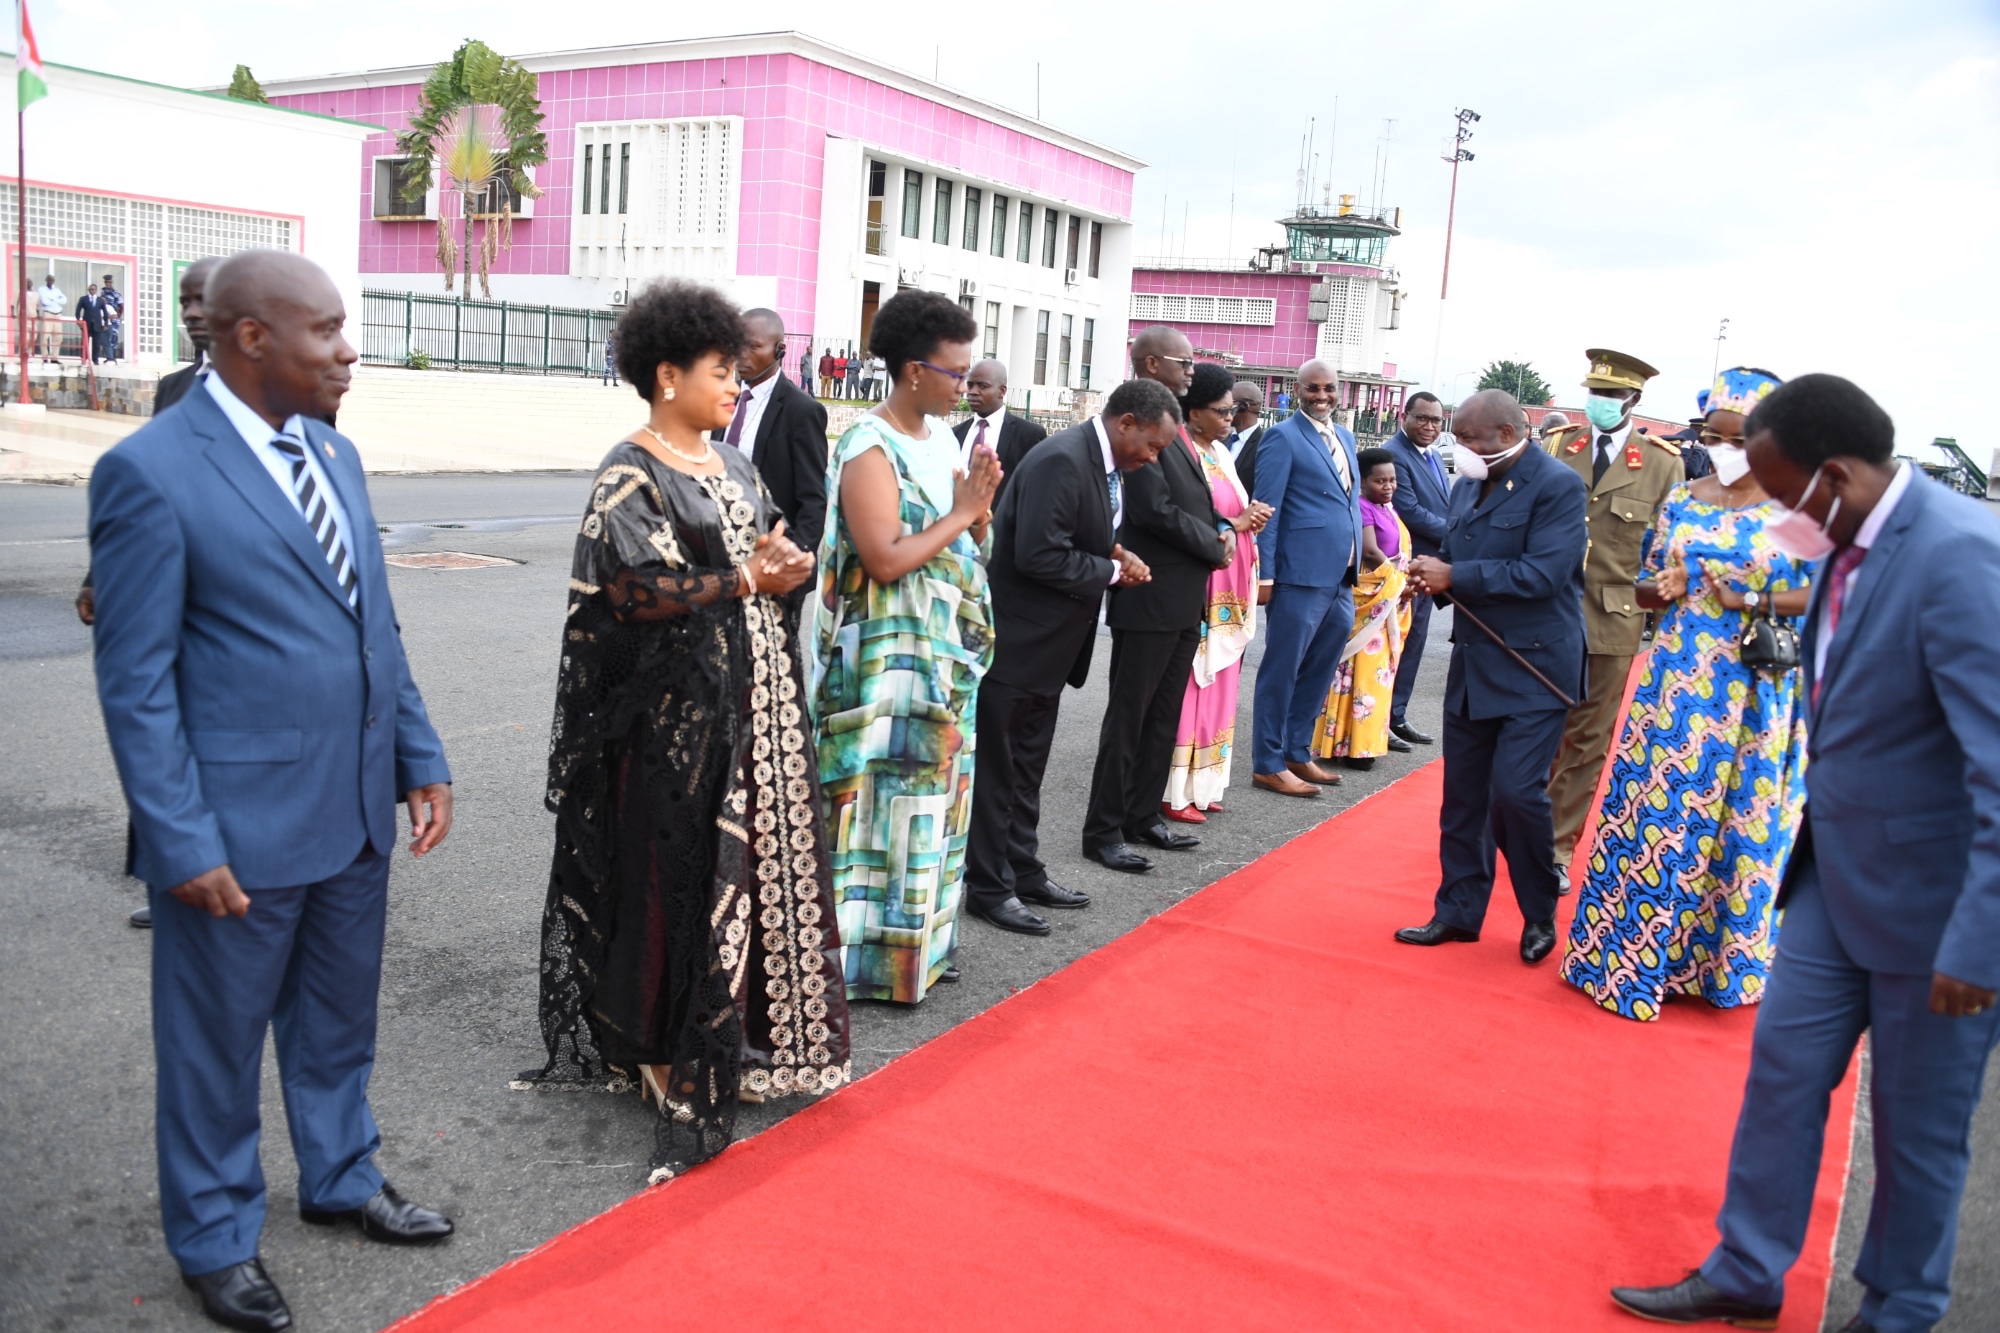 President Ndayishimiye has arrived at Bujumbura from a state visit in Equatorial Guinea